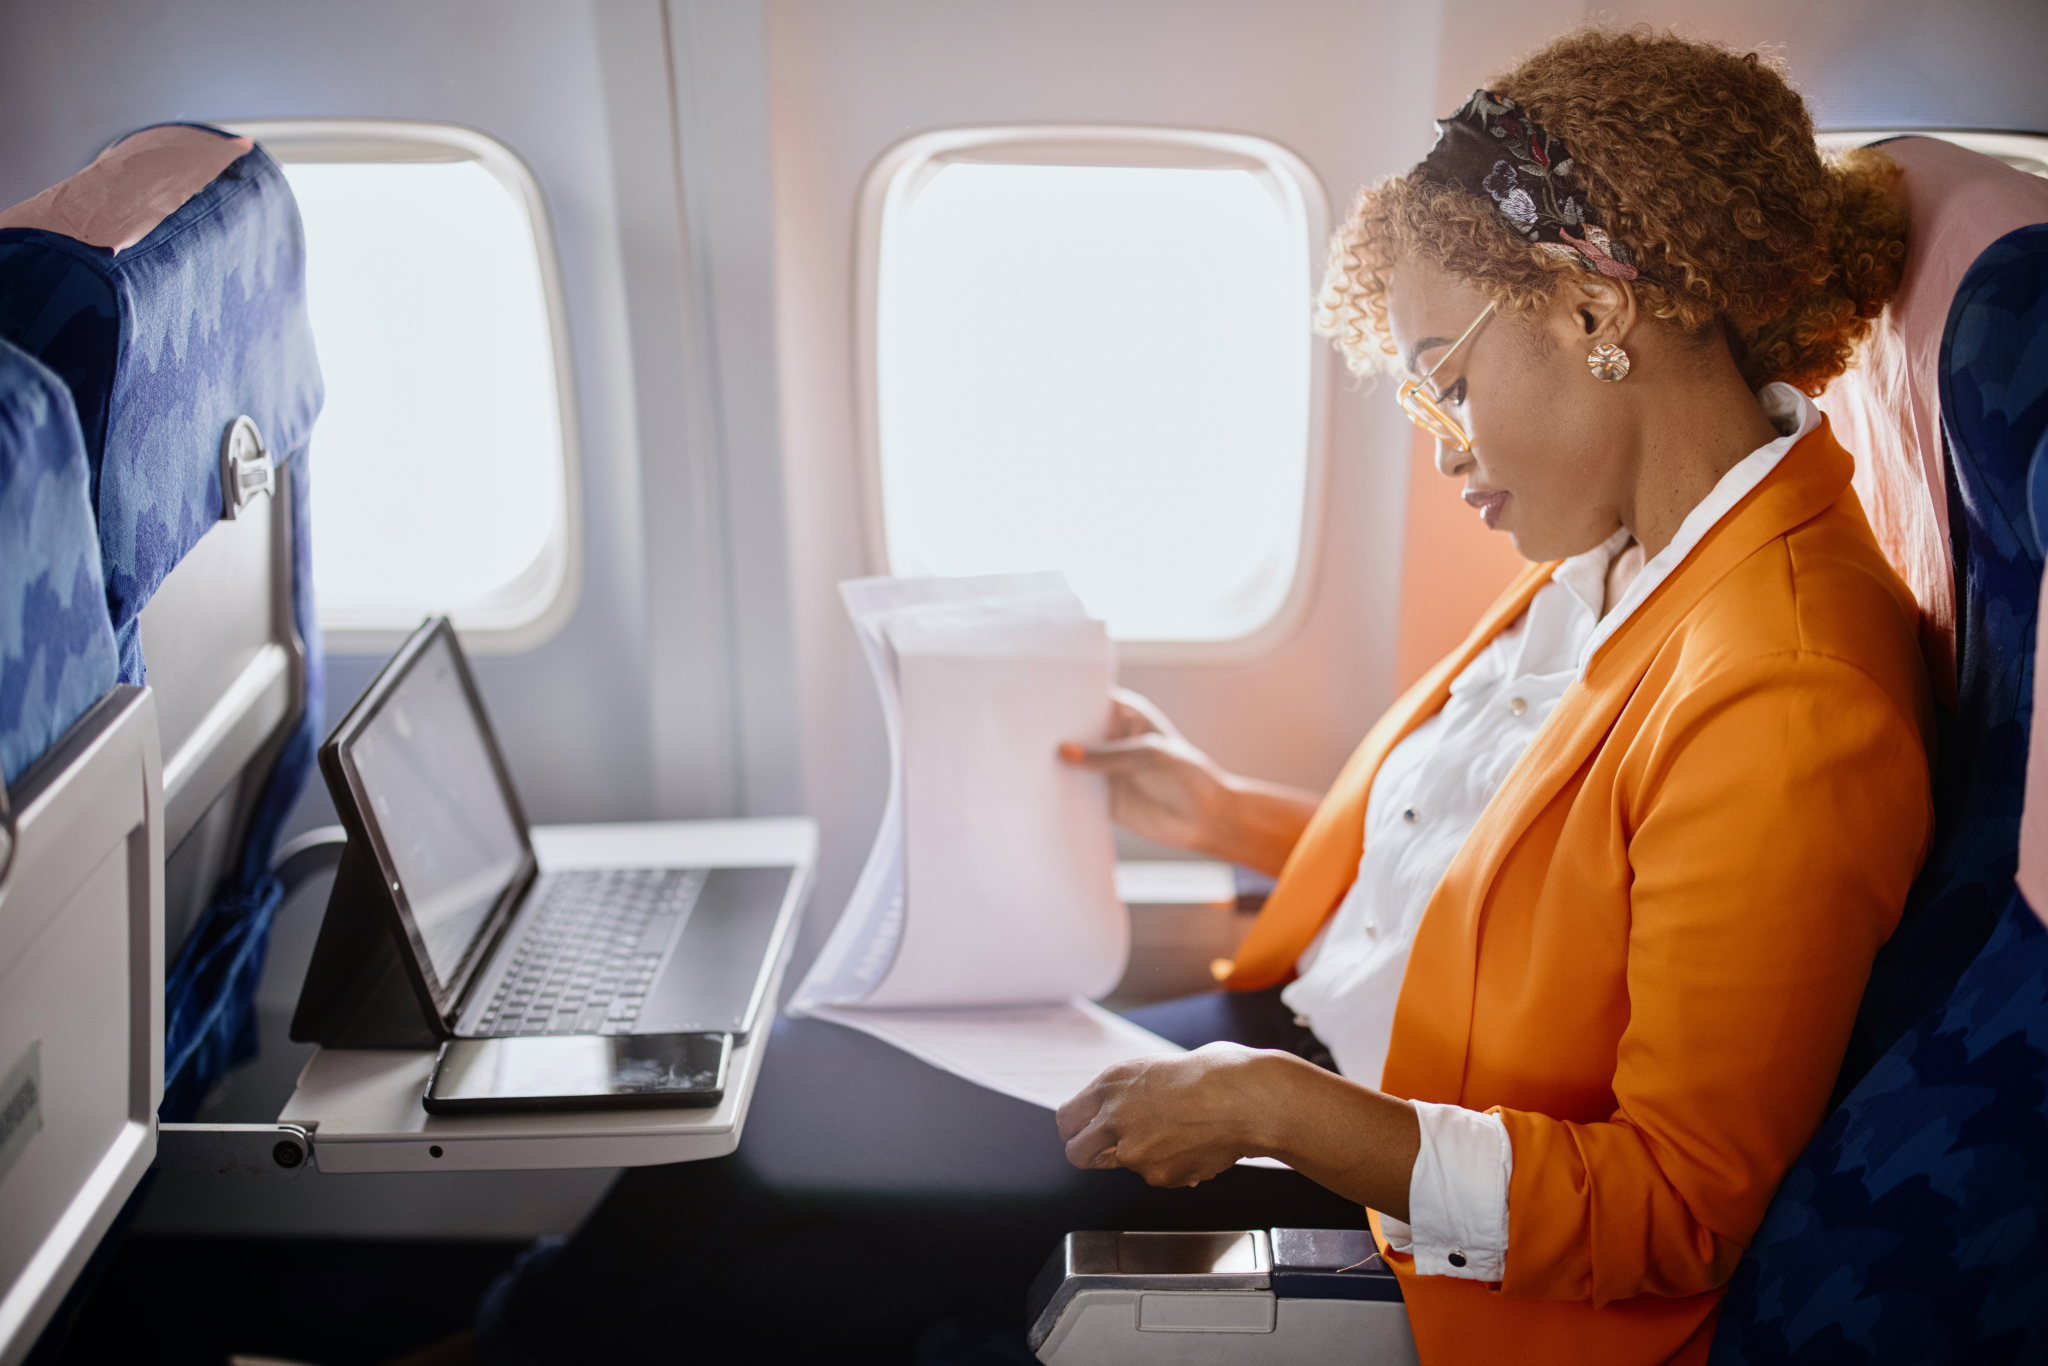  A woman working while traveling on a plane.